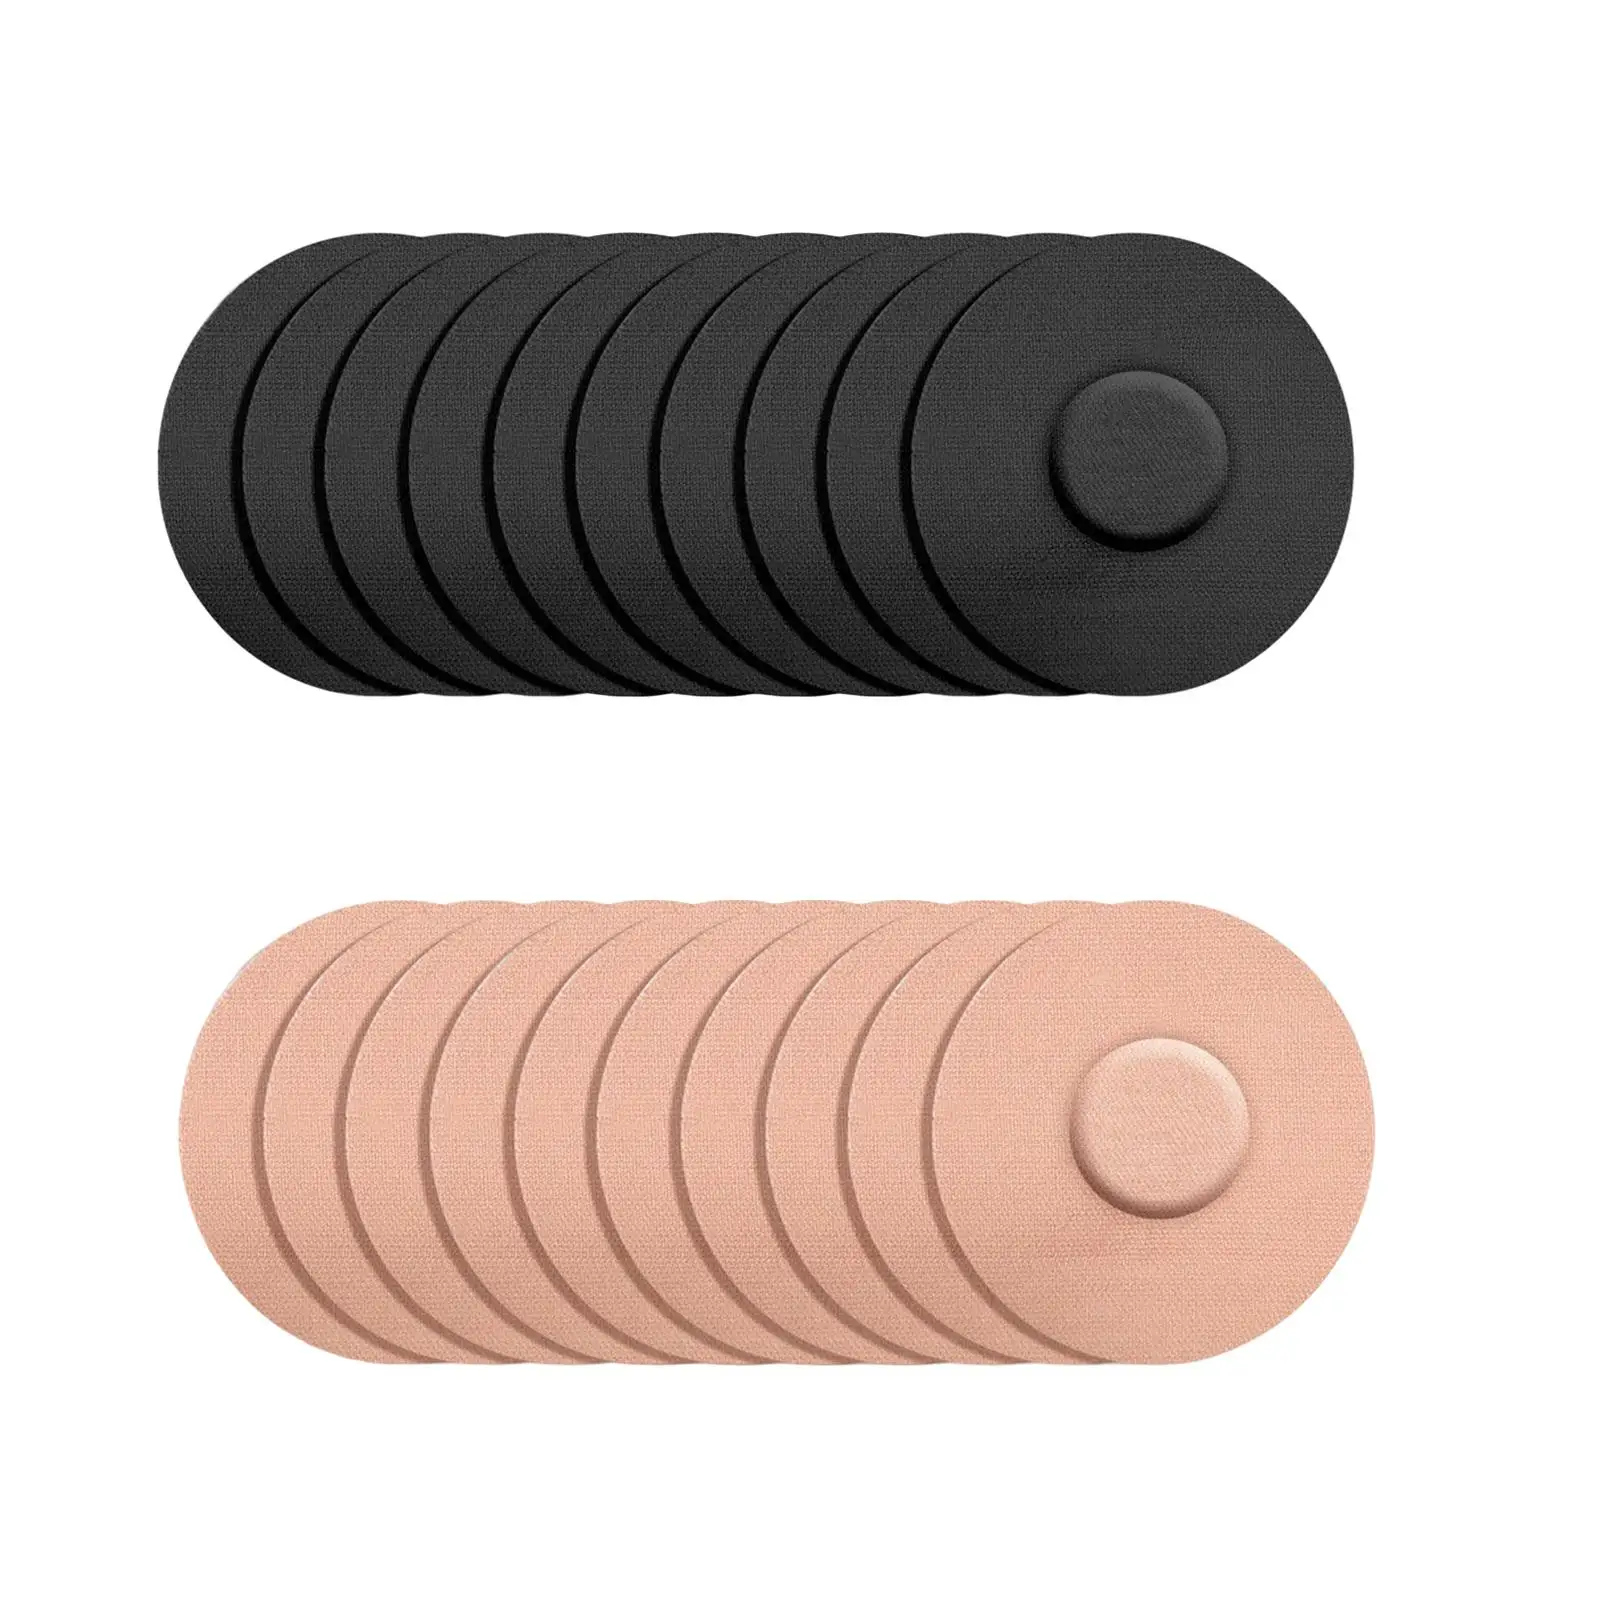 

10x Sensor Covers Flexible Breathable Tape Without Hole Fabric Sticky Patch Waterproof Adhesive Patches for Sports Fitness